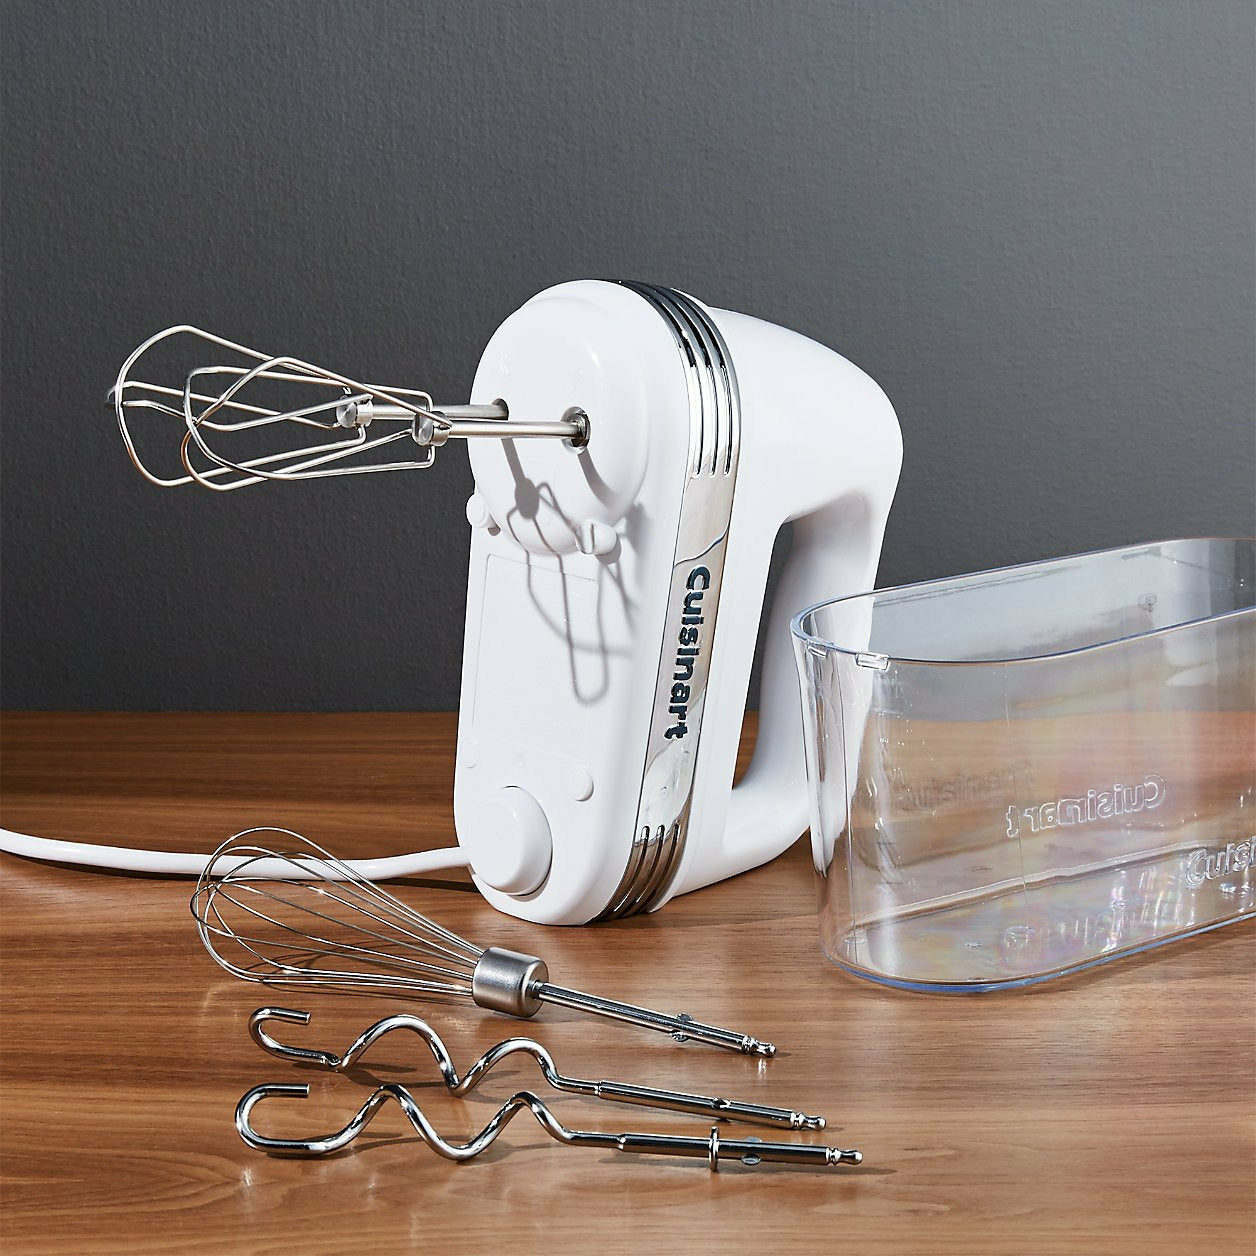 https://cdn.shopify.com/s/files/1/0269/2294/2529/products/cuisinart-9-speed-hand-mixer-with-storage-case-white_1800x1800.jpg?v=1598122239